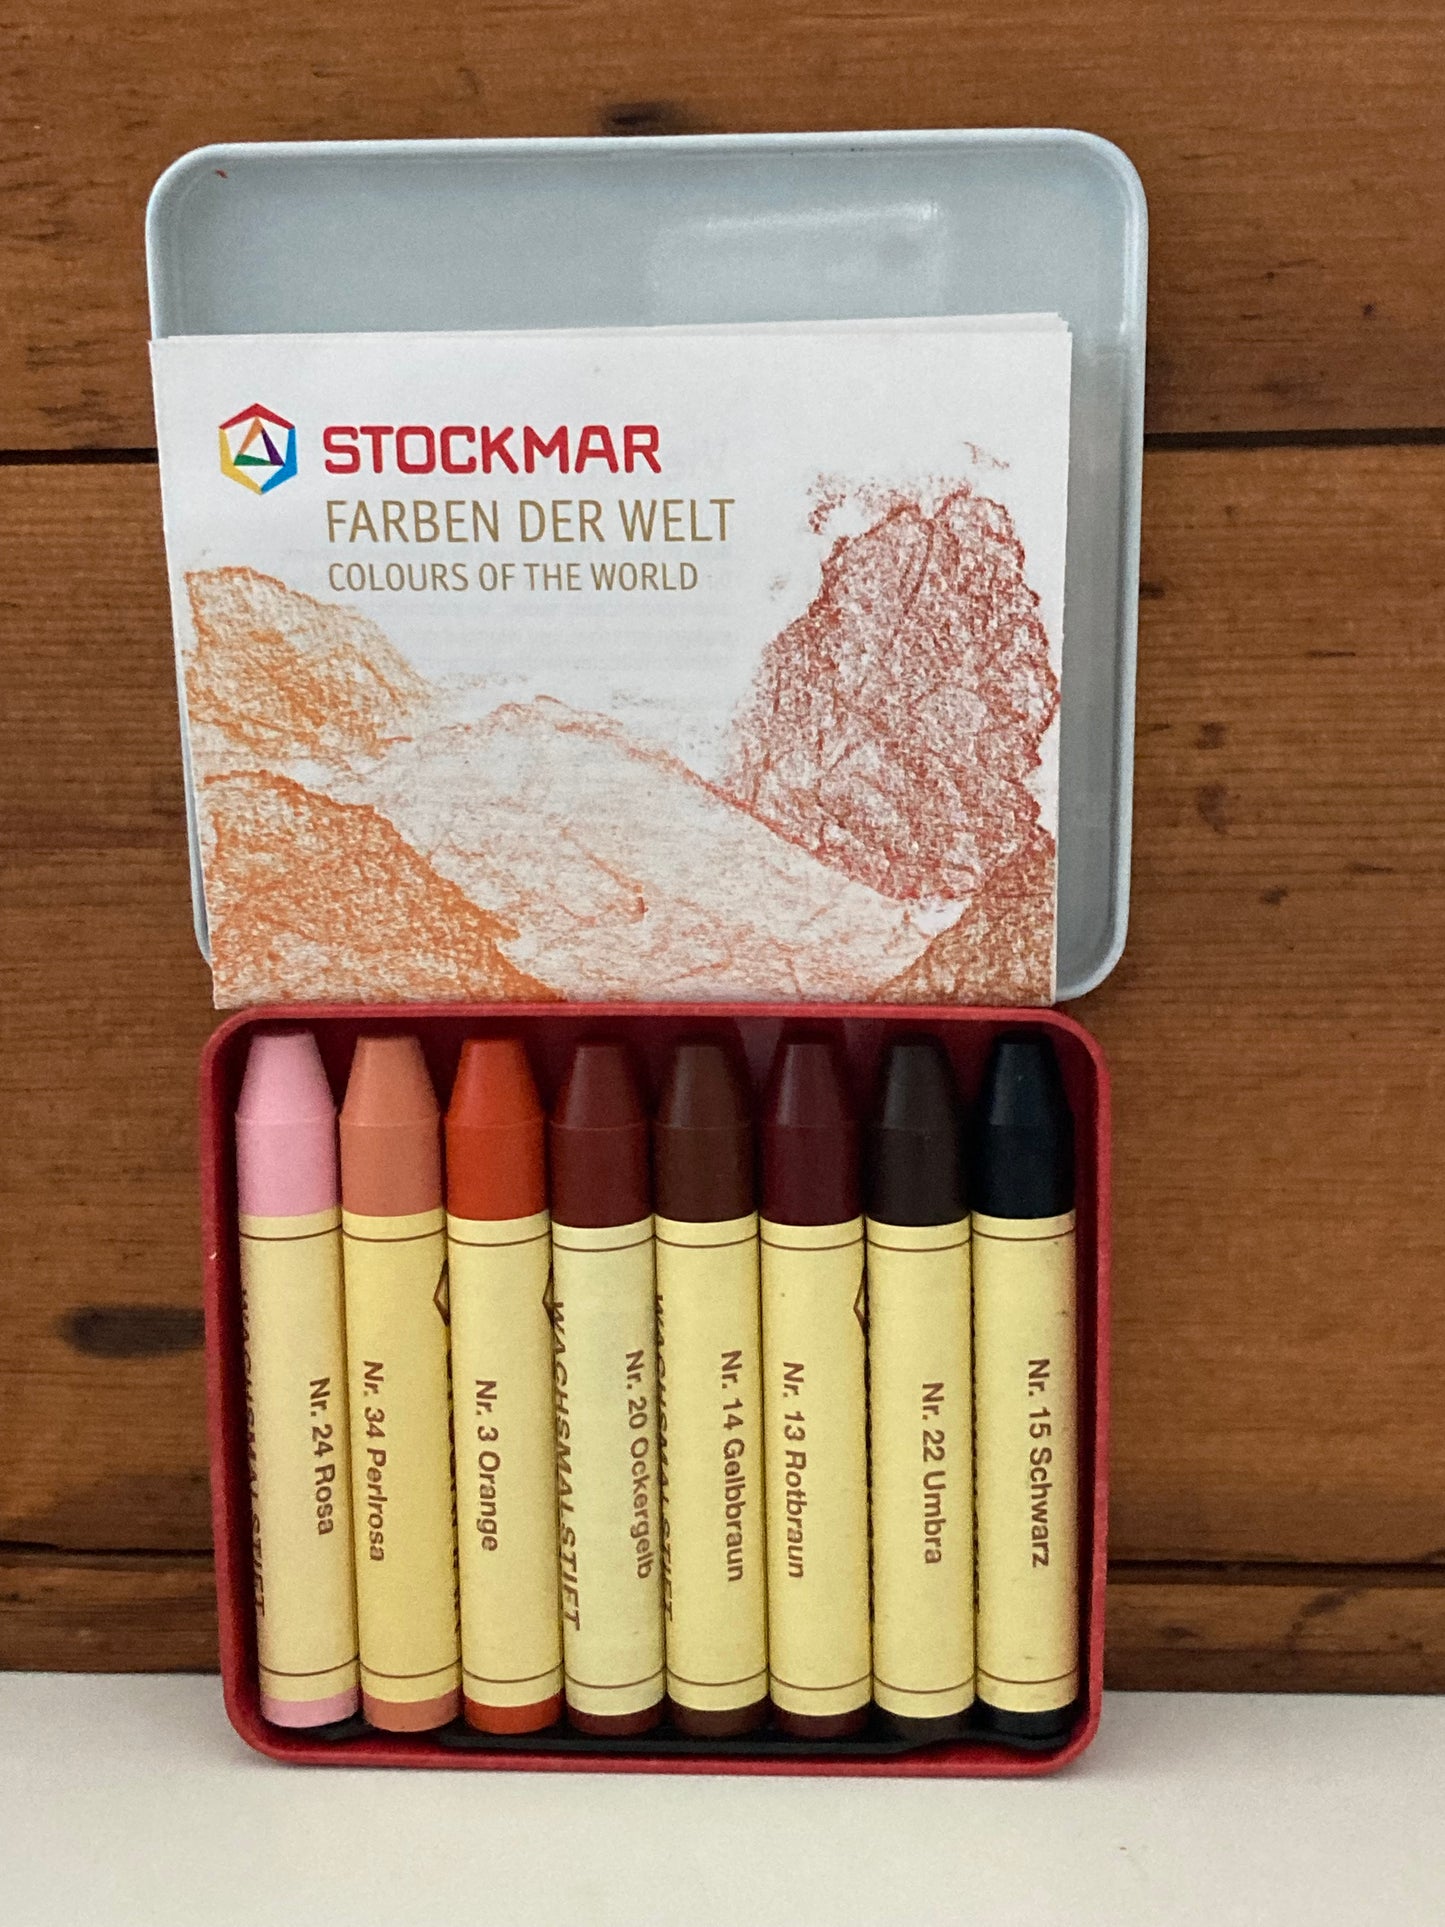 Beeswax, Art - NEW! COLOURS OF THE WORLD! 8 STICK CRAYONS in a Tin